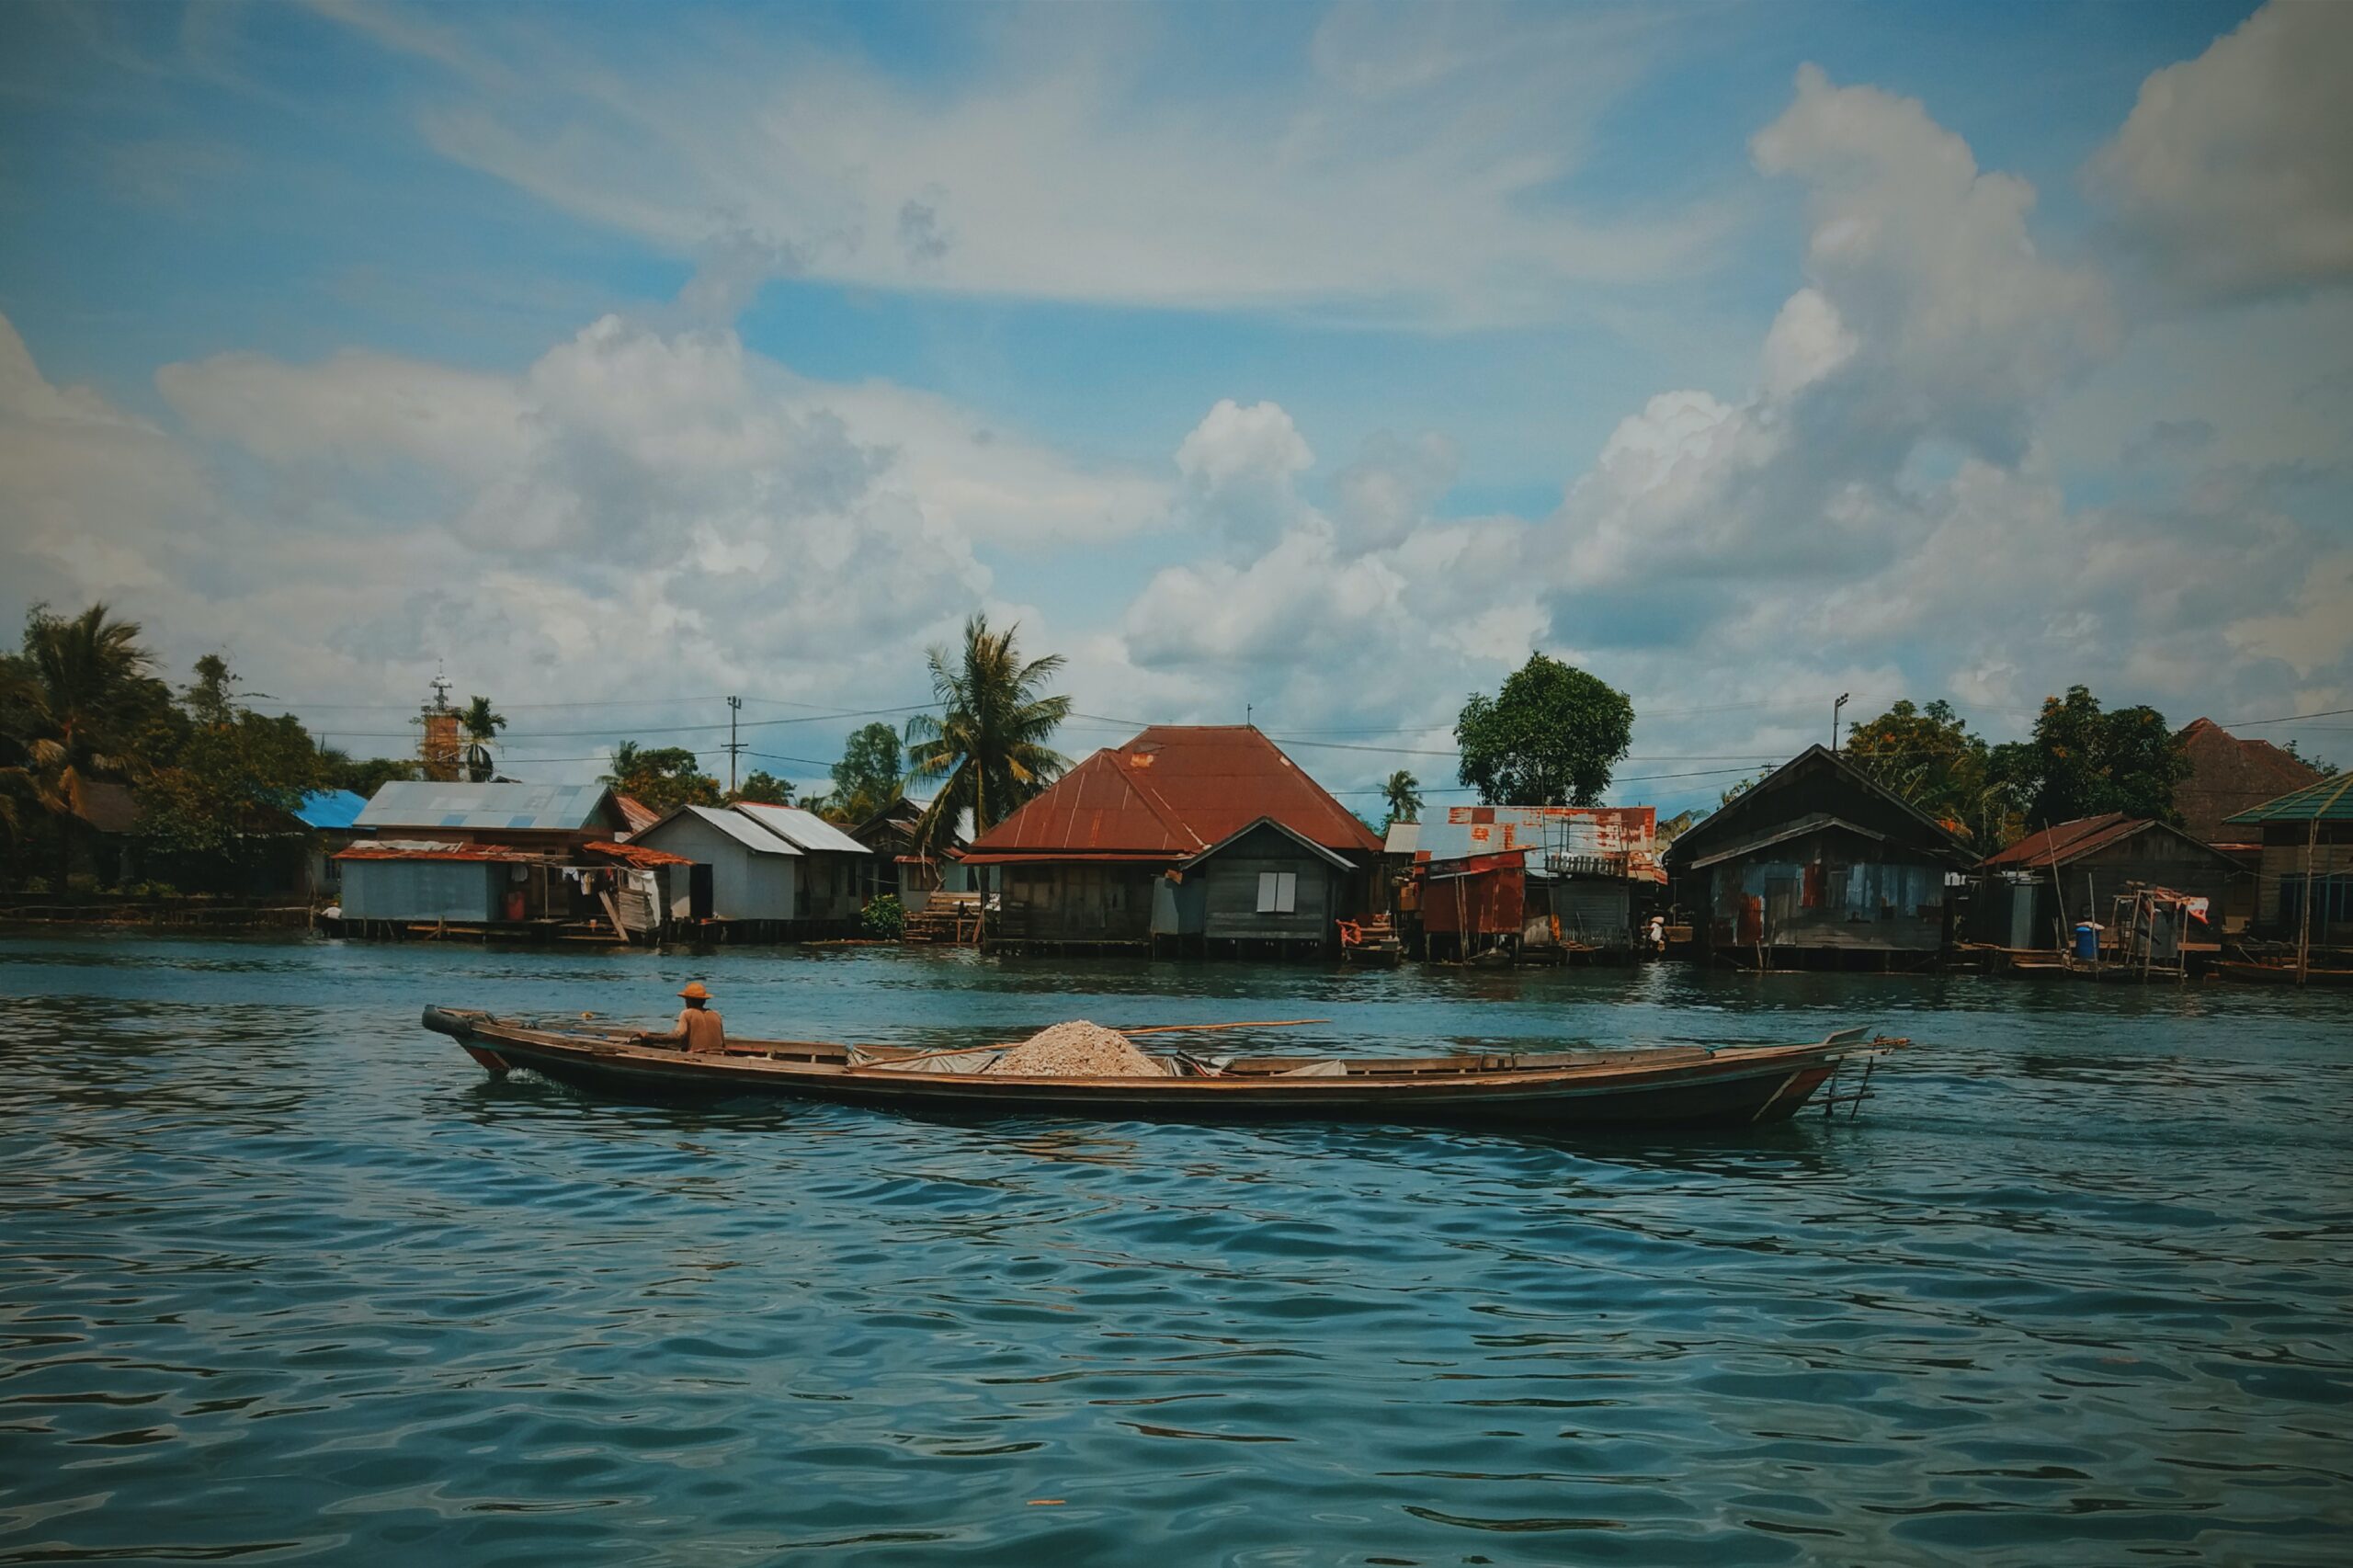 Raja Ampat regency tourism areas, West Papua Province, will stay open throughout the Lebaran holiday season this season